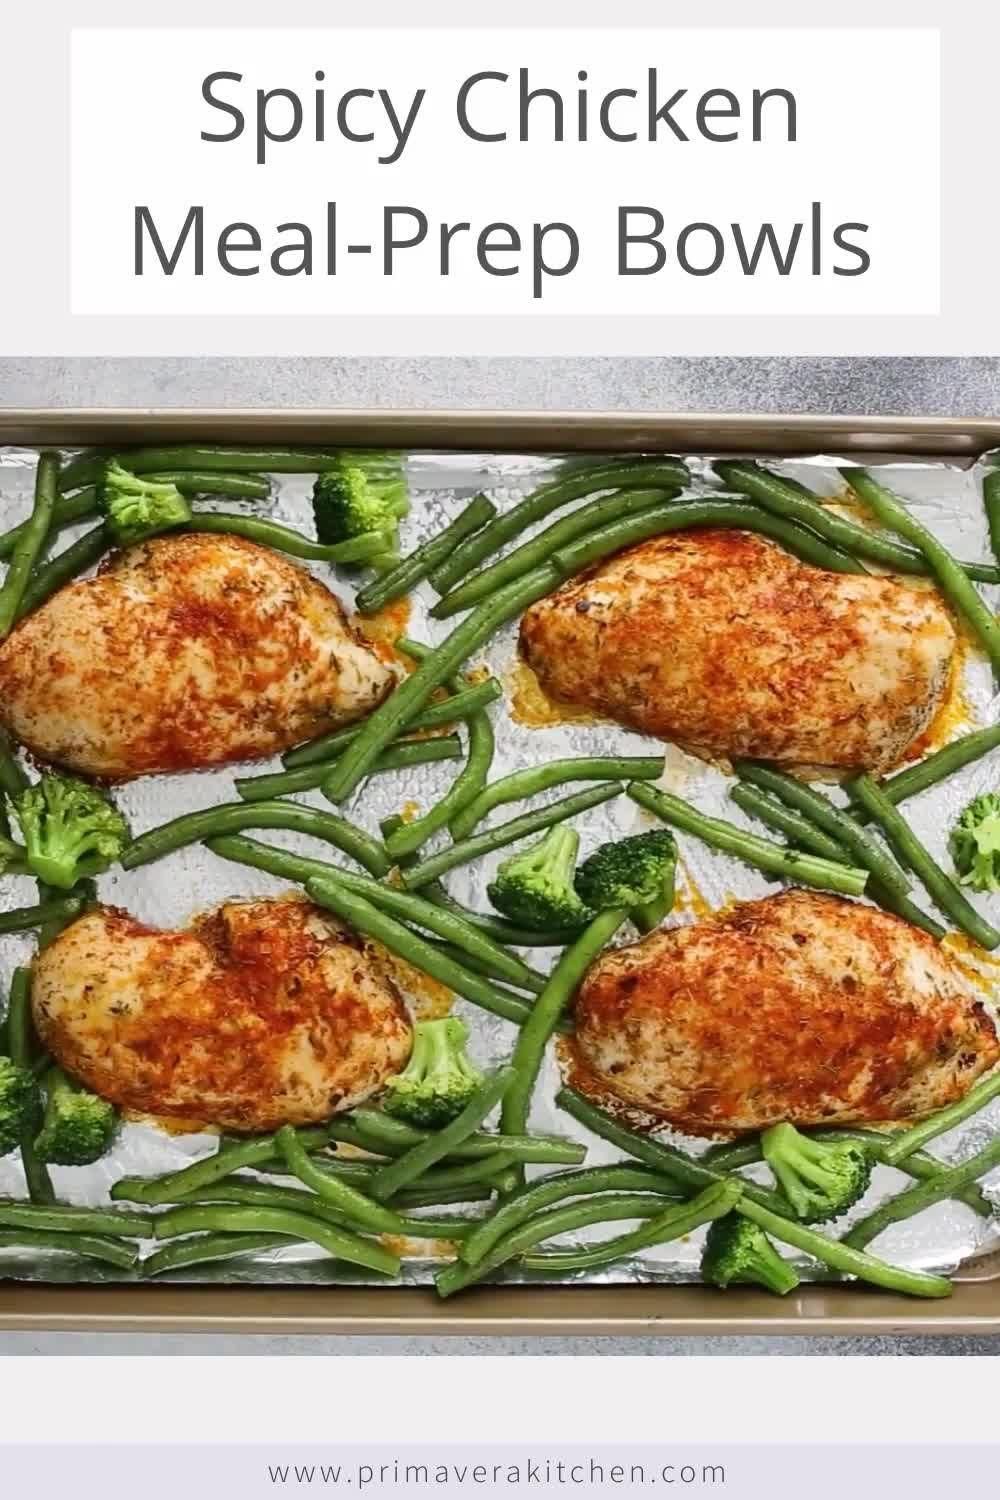 Spicy Chicken Meal-Prep Bowls -   18 meal prep recipes for the week ideas